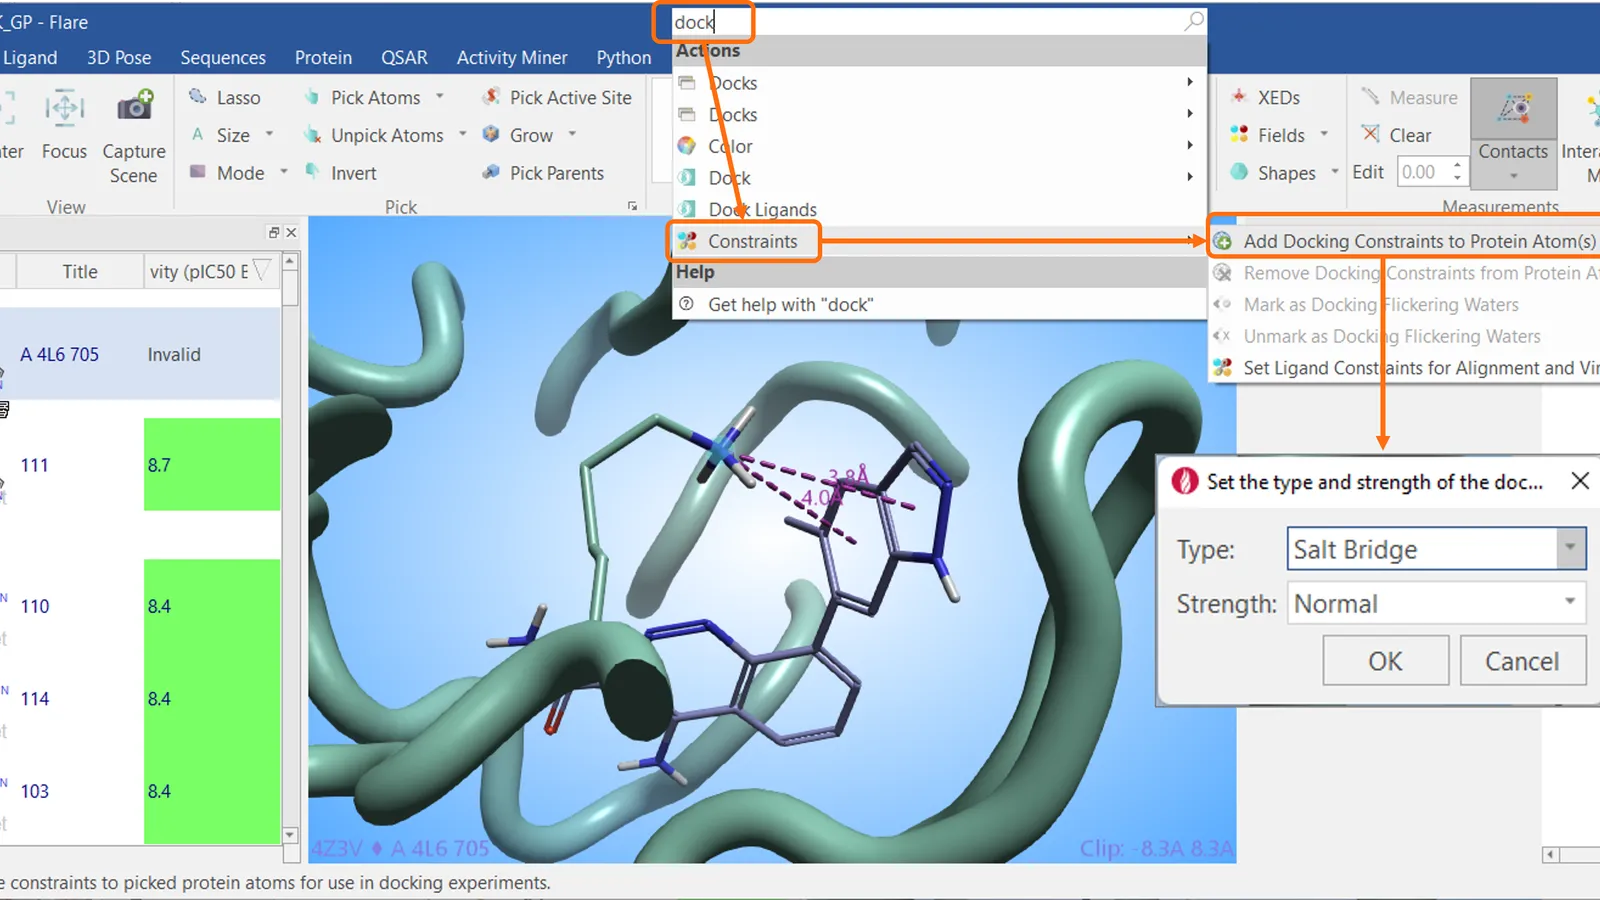 The new 'Search' box to help users find key features and components in molecular modelling platform, Flare, Version 7